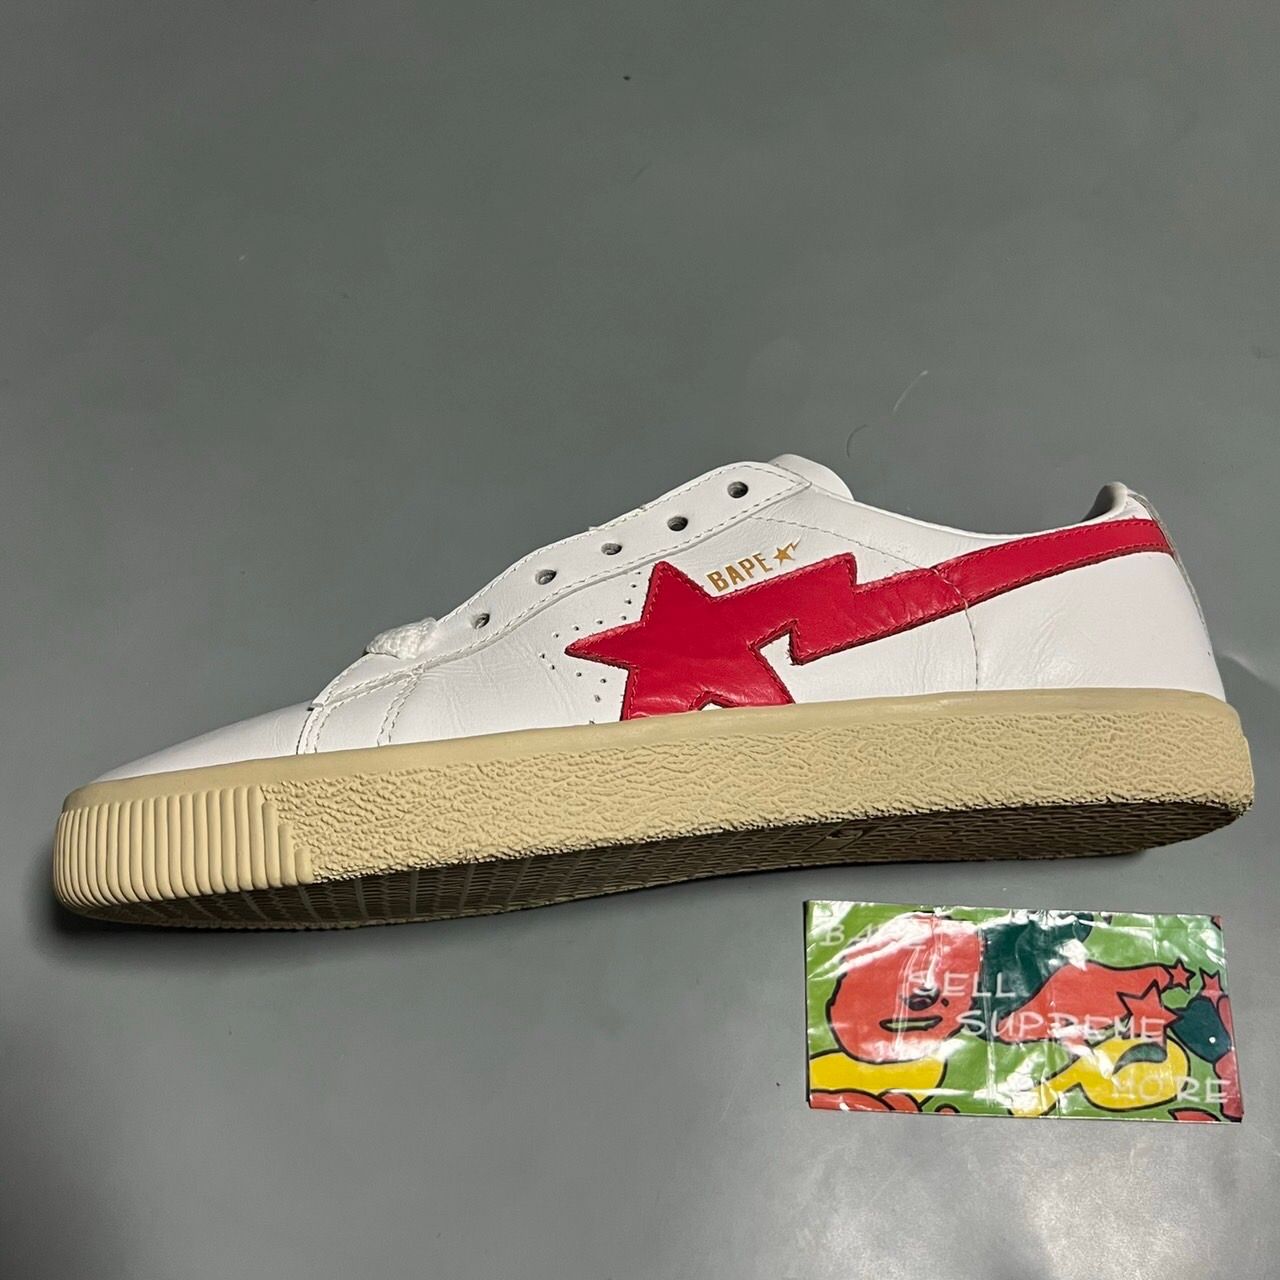 Pre-owned Bape Crepsta White/red Shoes